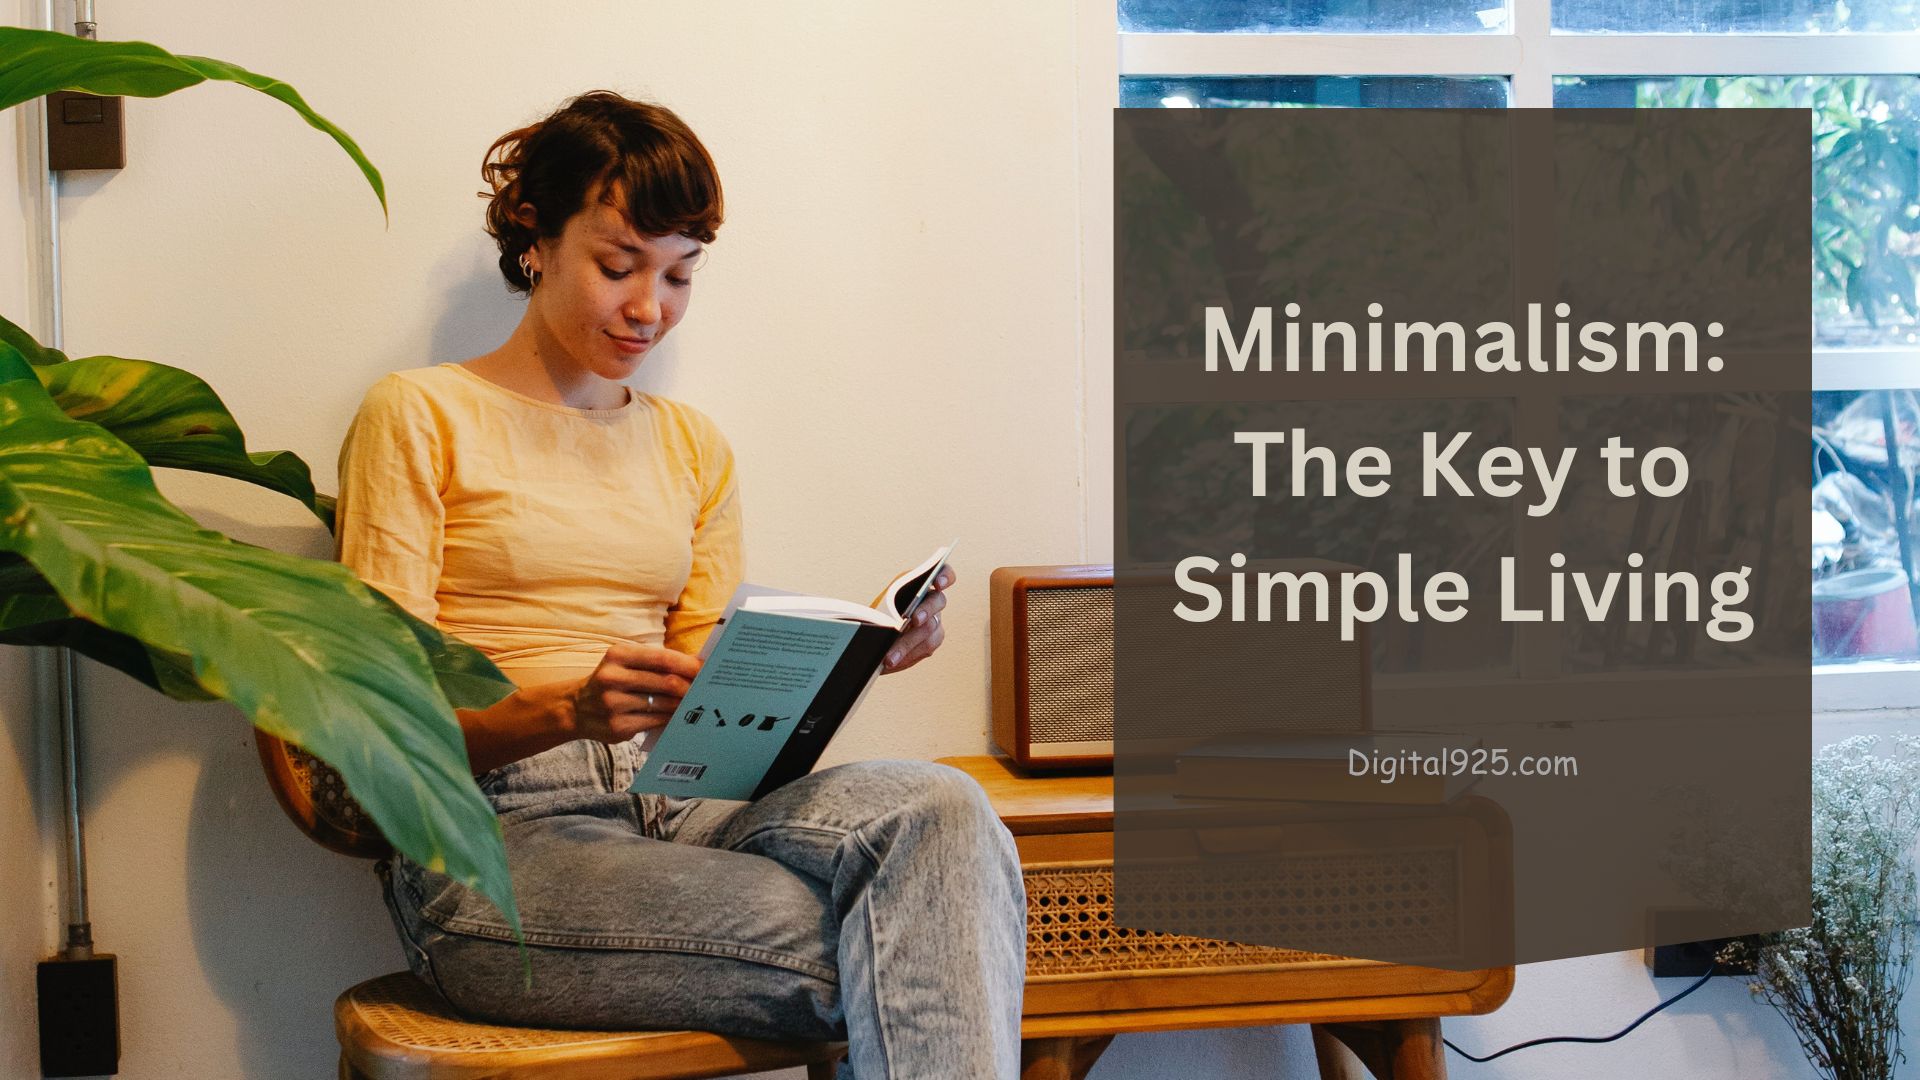 Minimalism: The Key to Simple Living